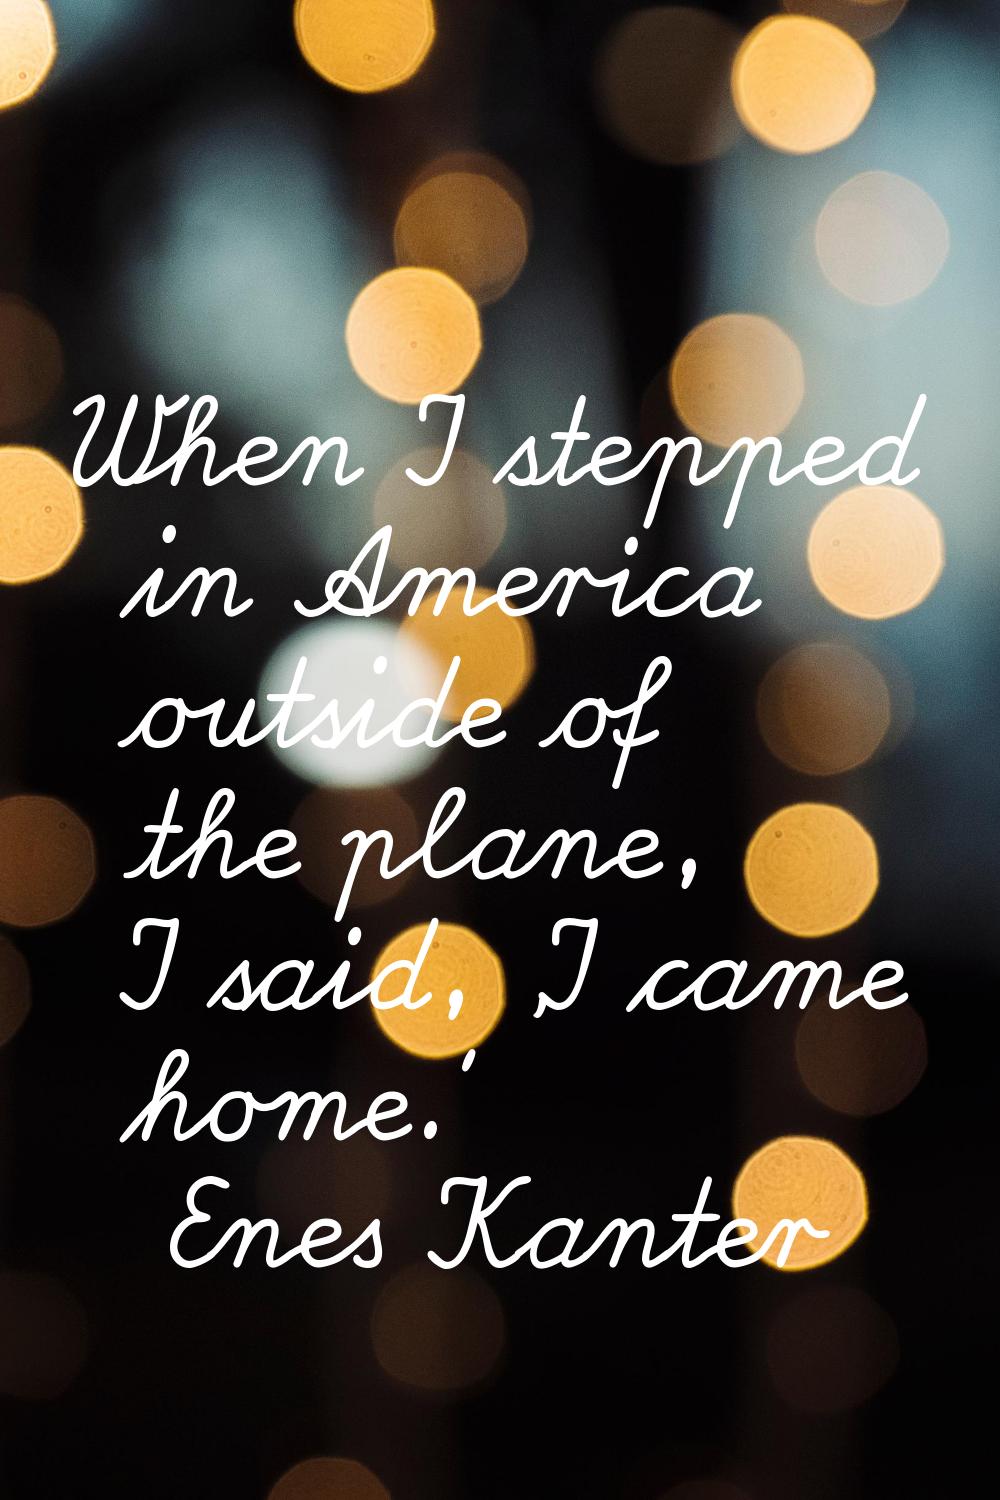 When I stepped in America outside of the plane, I said, 'I came home.'